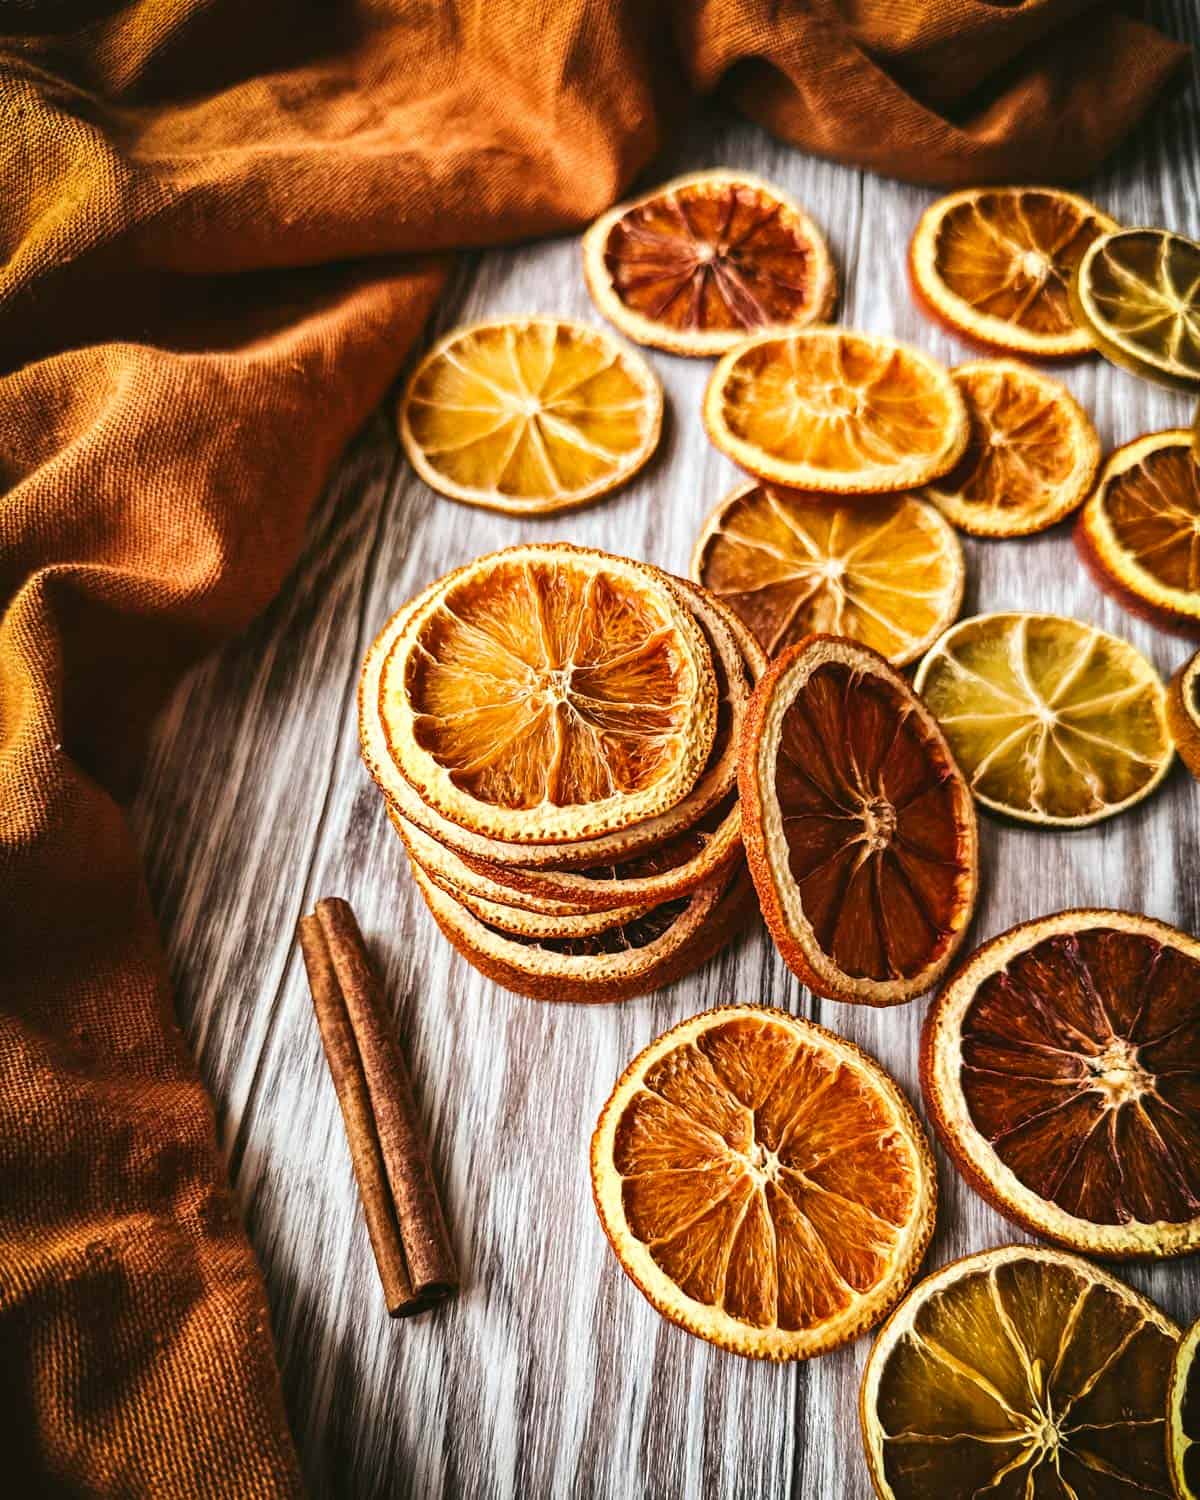 A stack of dried orange slices surrounded by orange slices and cinnamon sticks laying on a gray wood surface and a rust orange color cloth.